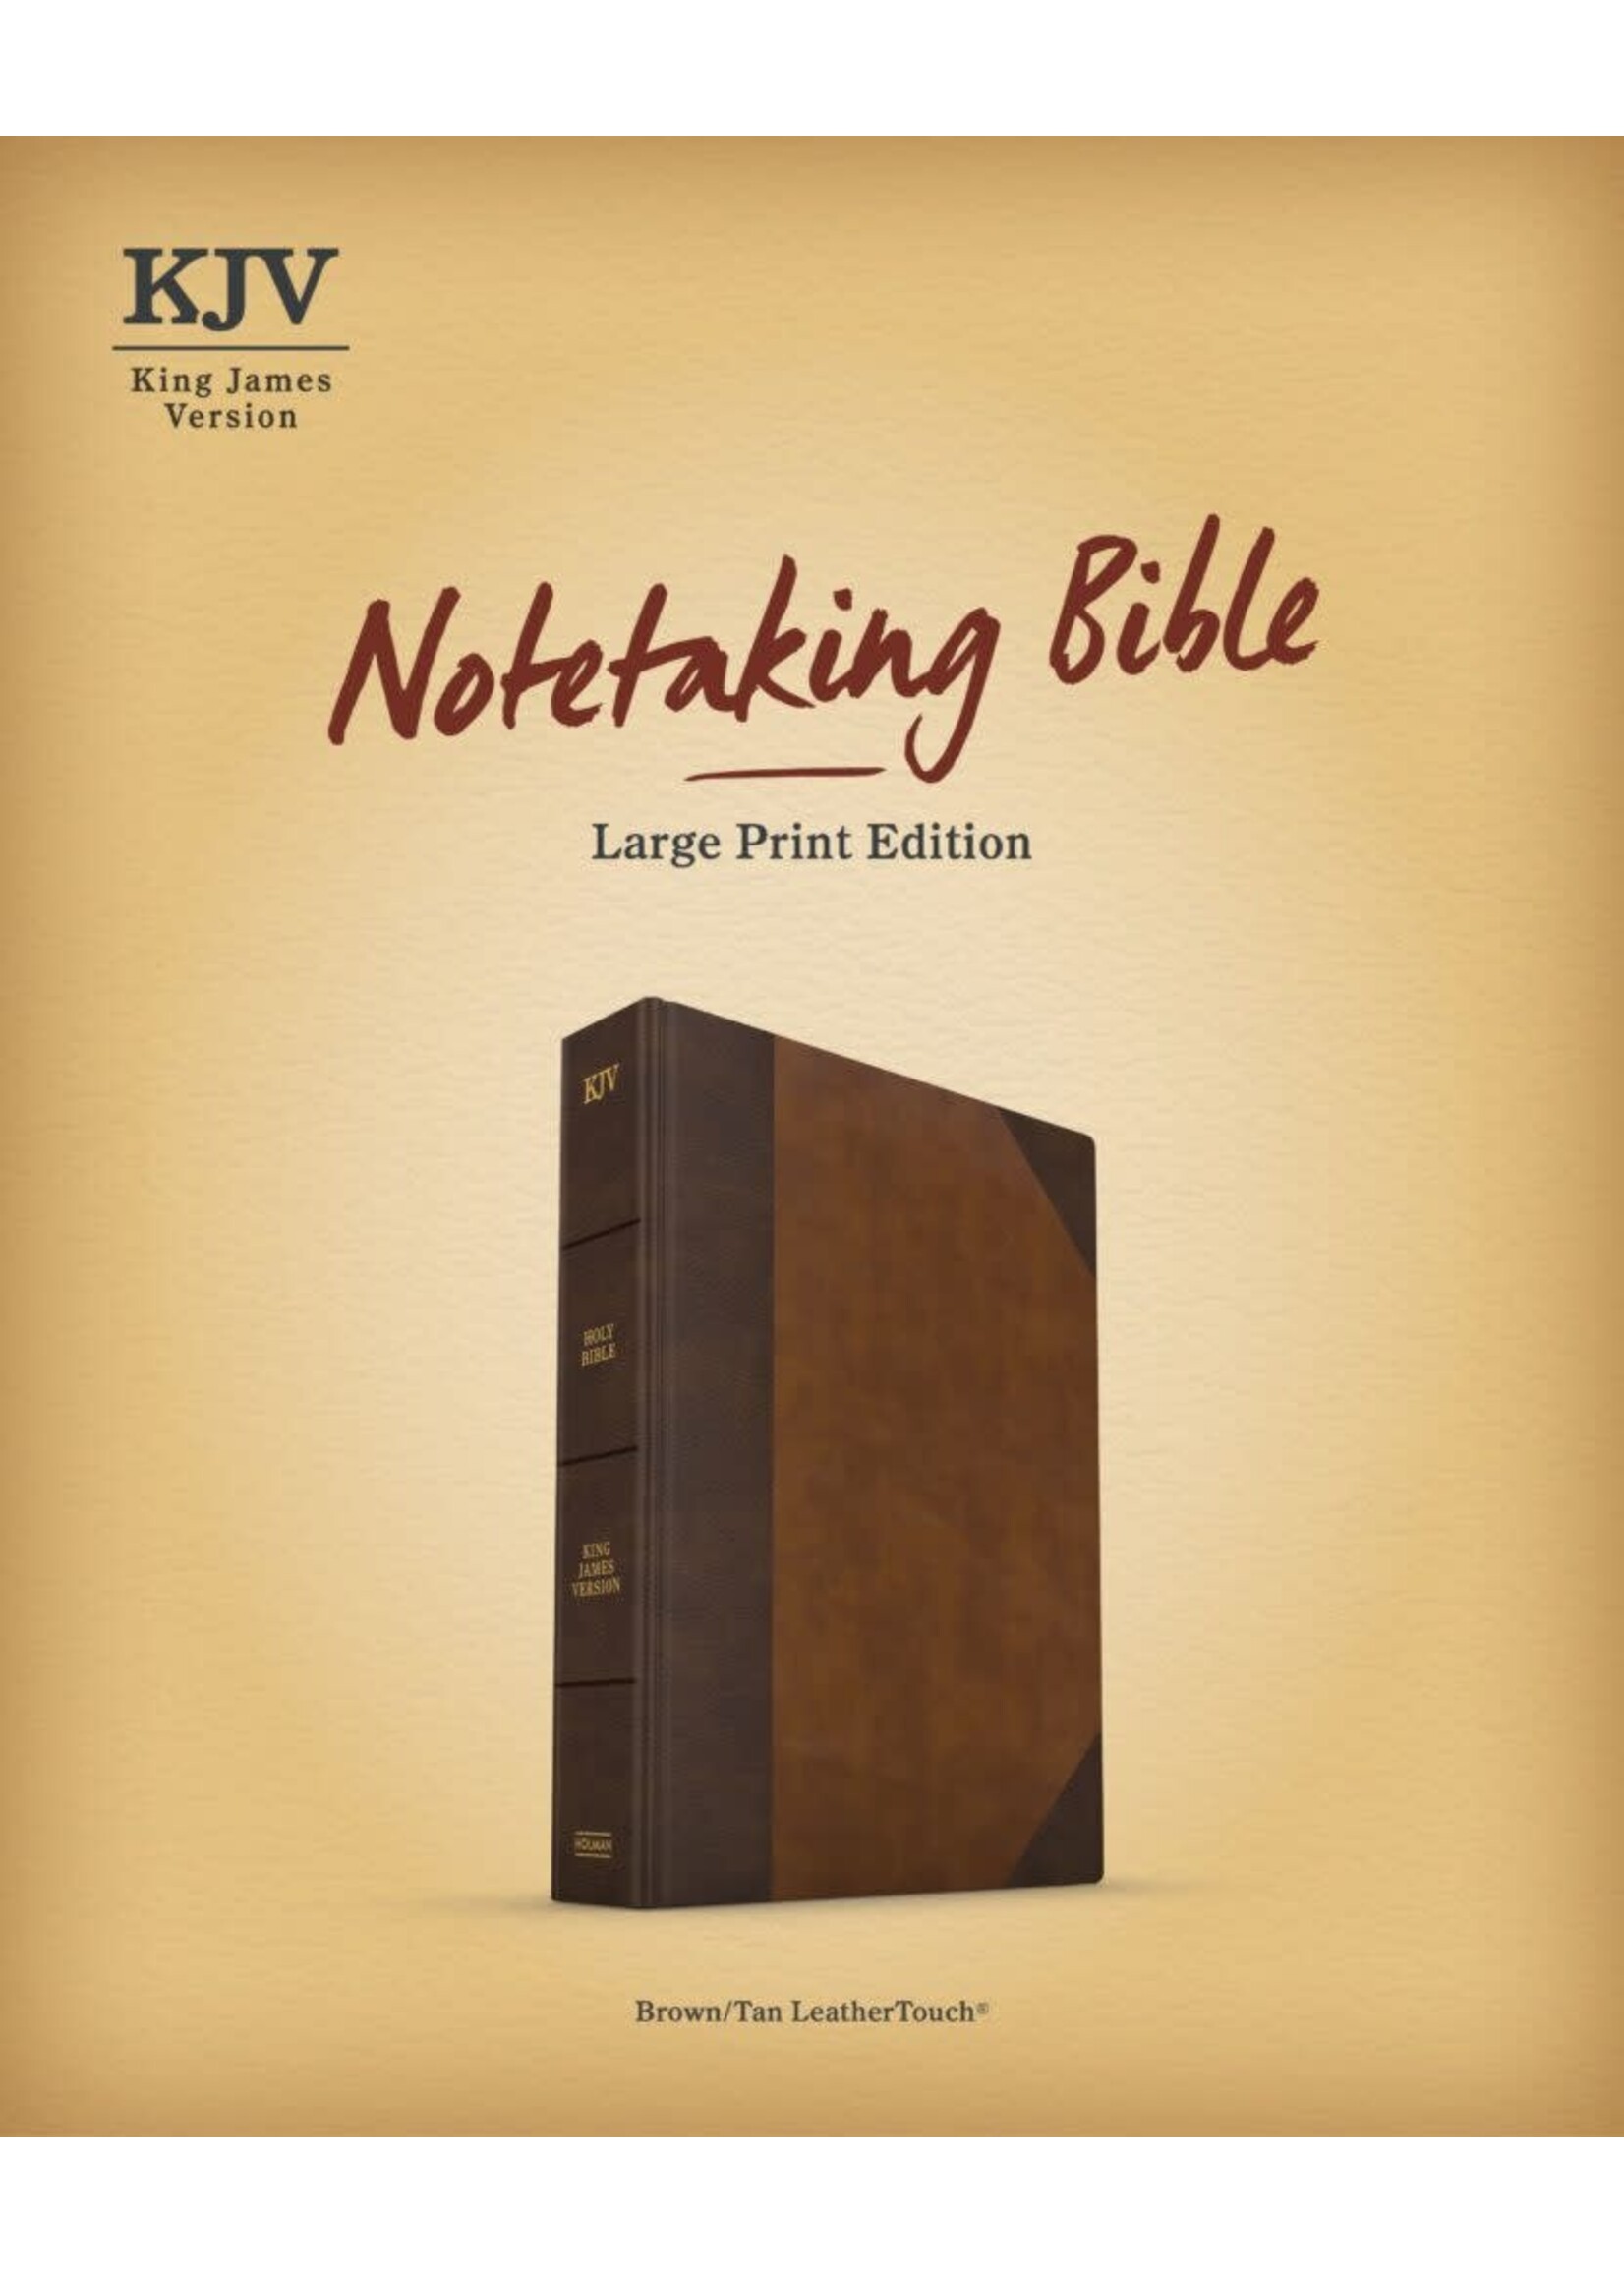 KJV Notetaking Bible, Large Print Edition, Brown/Tan LeatherTouch-Over-Board